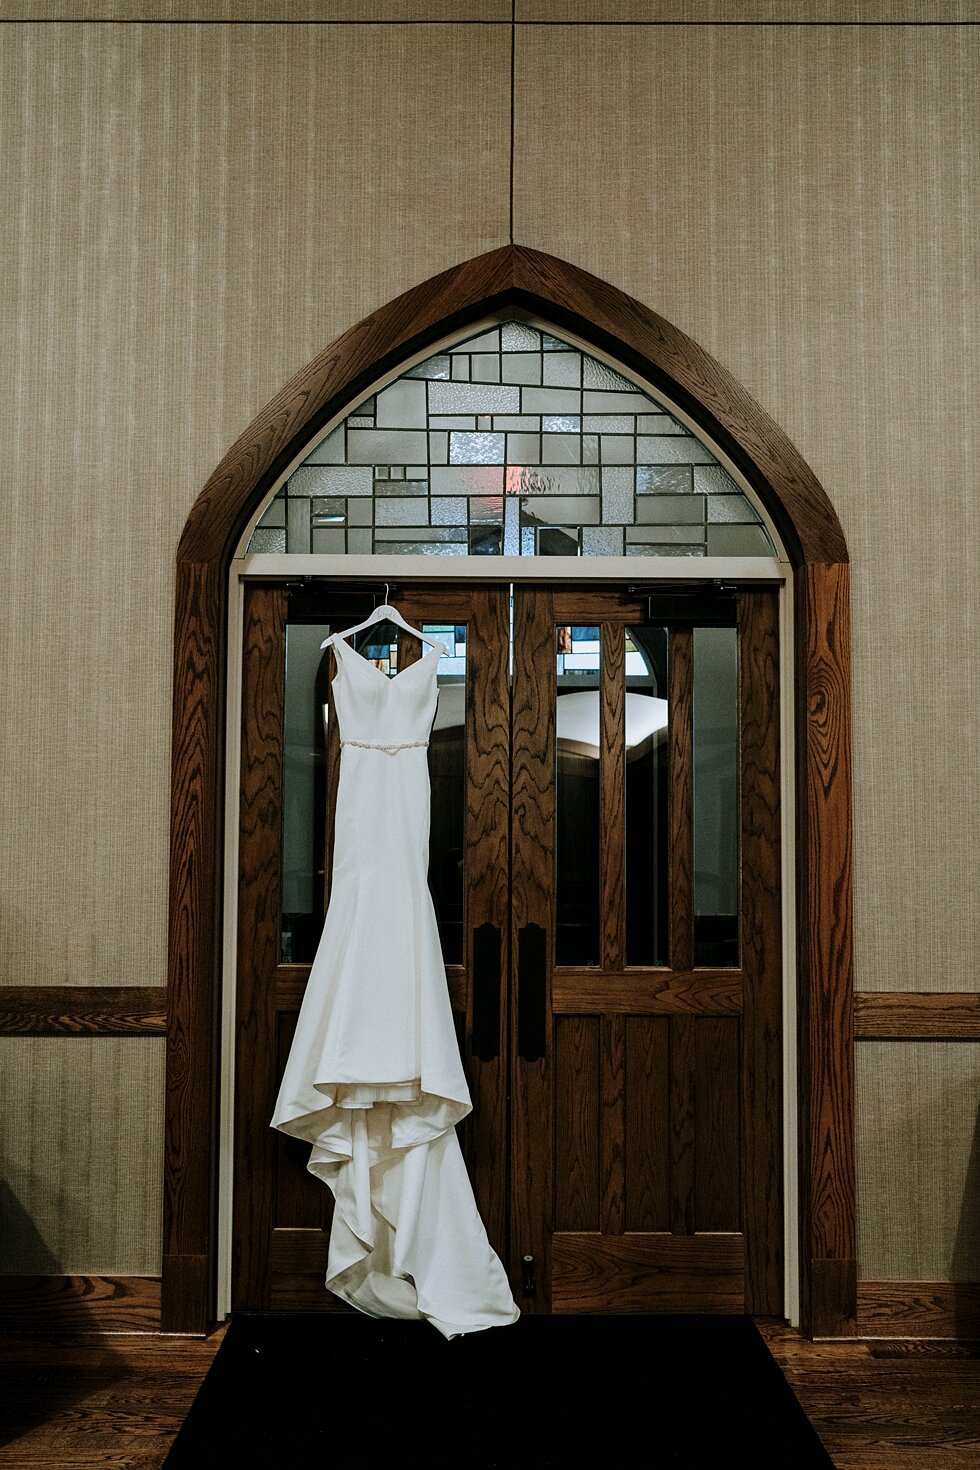  The brides gorgeous wedding gown hung at their ceremony location with her accessories prior to getting ready! #thatsdarling #weddingday #weddinginspiration #weddingphoto #love #justmarried #midwestphotographer #kywedding #louisville #kentuckywedding